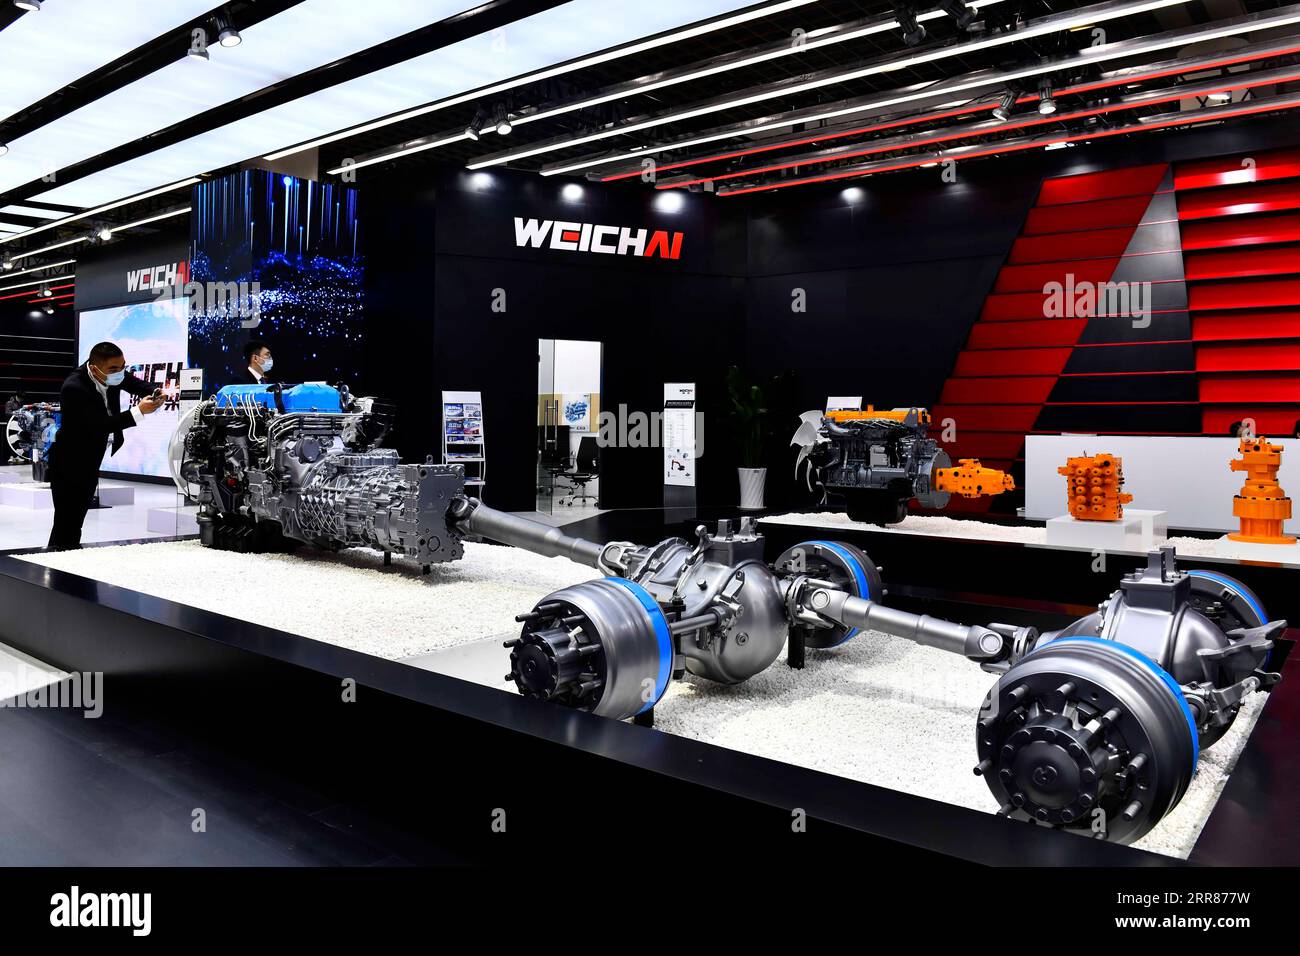 210422 -- JINAN, April 22, 2021 -- People view the engines presented by Weichai Power Co., Ltd. at the 2nd World Congress on Internal Combustion Engines in Jinan, east China s Shandong Province, April 21, 2021. The technology of producing high-end diesel engine used to be a bottleneck for China s equipment manufacturing industry. Weichai Power Co., Ltd., a state-owned enterprise founded in 1946, has developed China s first high-speed and high-power engine with completely independent intellectual property rights after more than ten years of scientific and technological research, completely endi Stock Photo